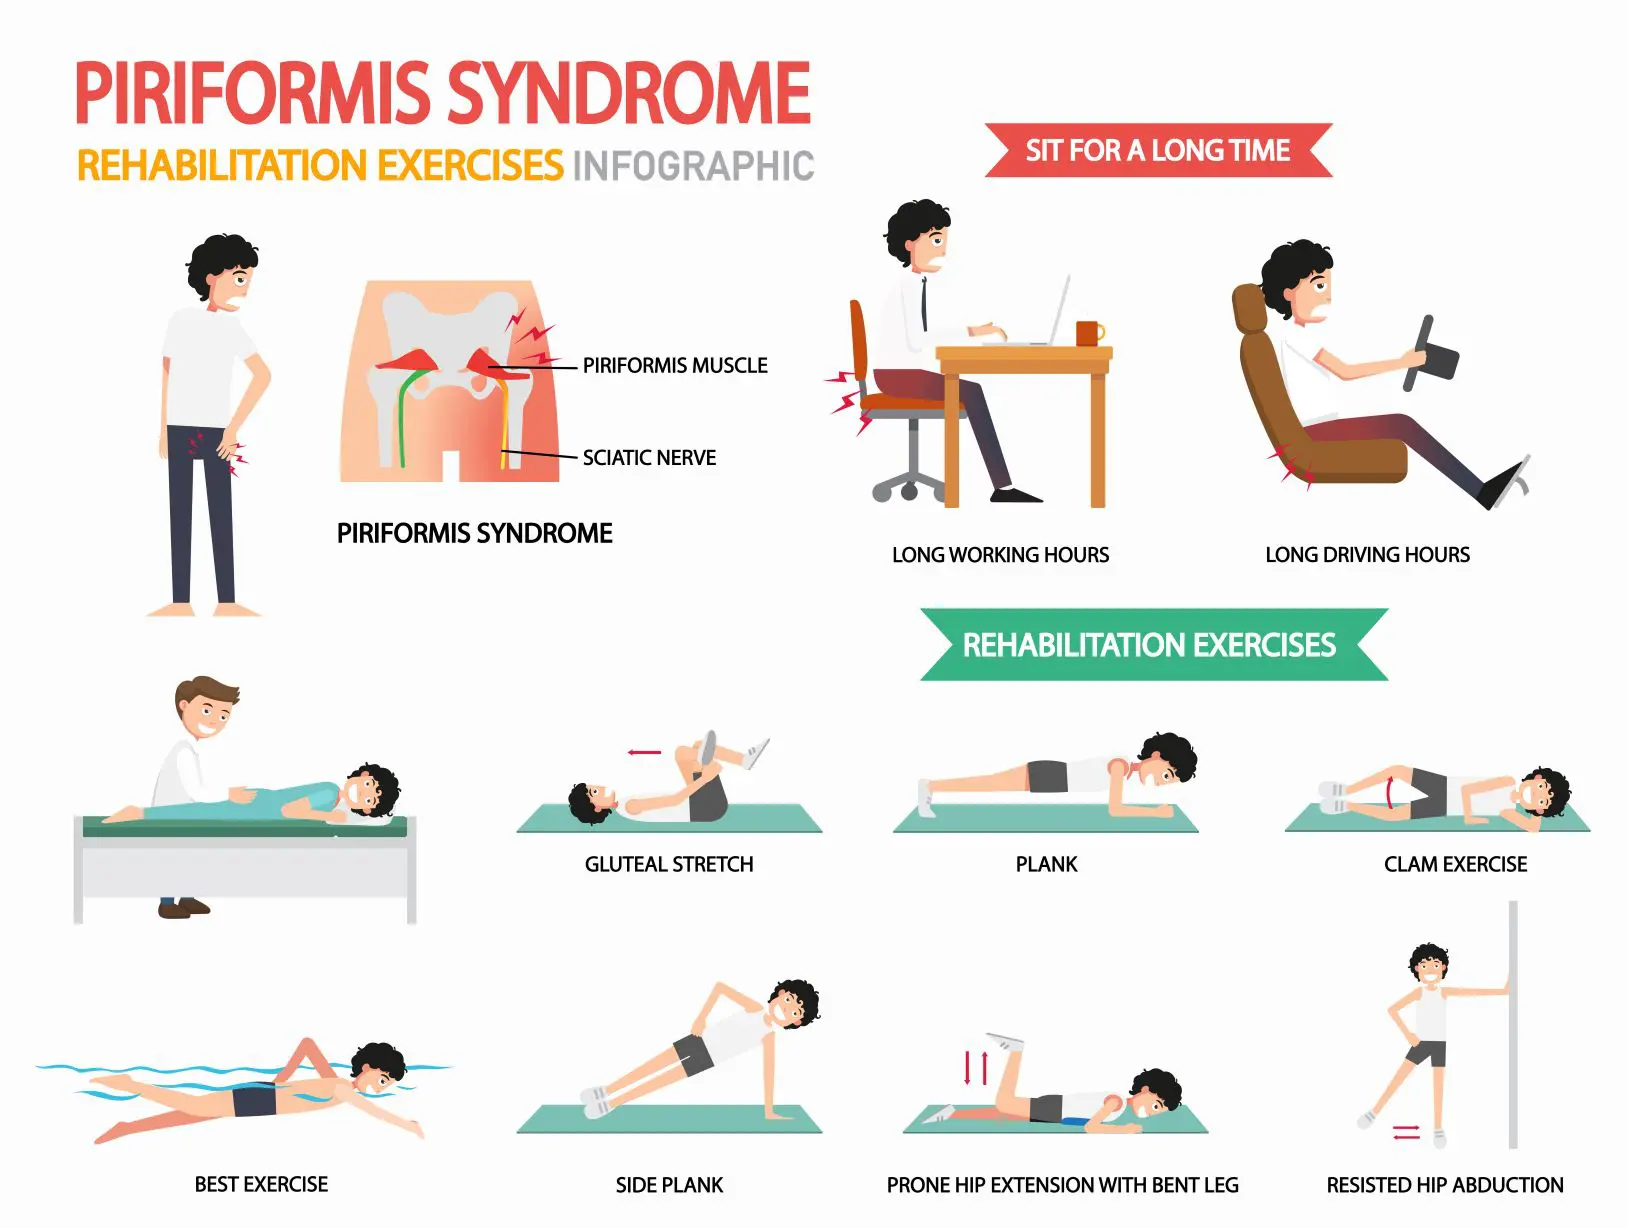 Information about Piriformis Syndrome